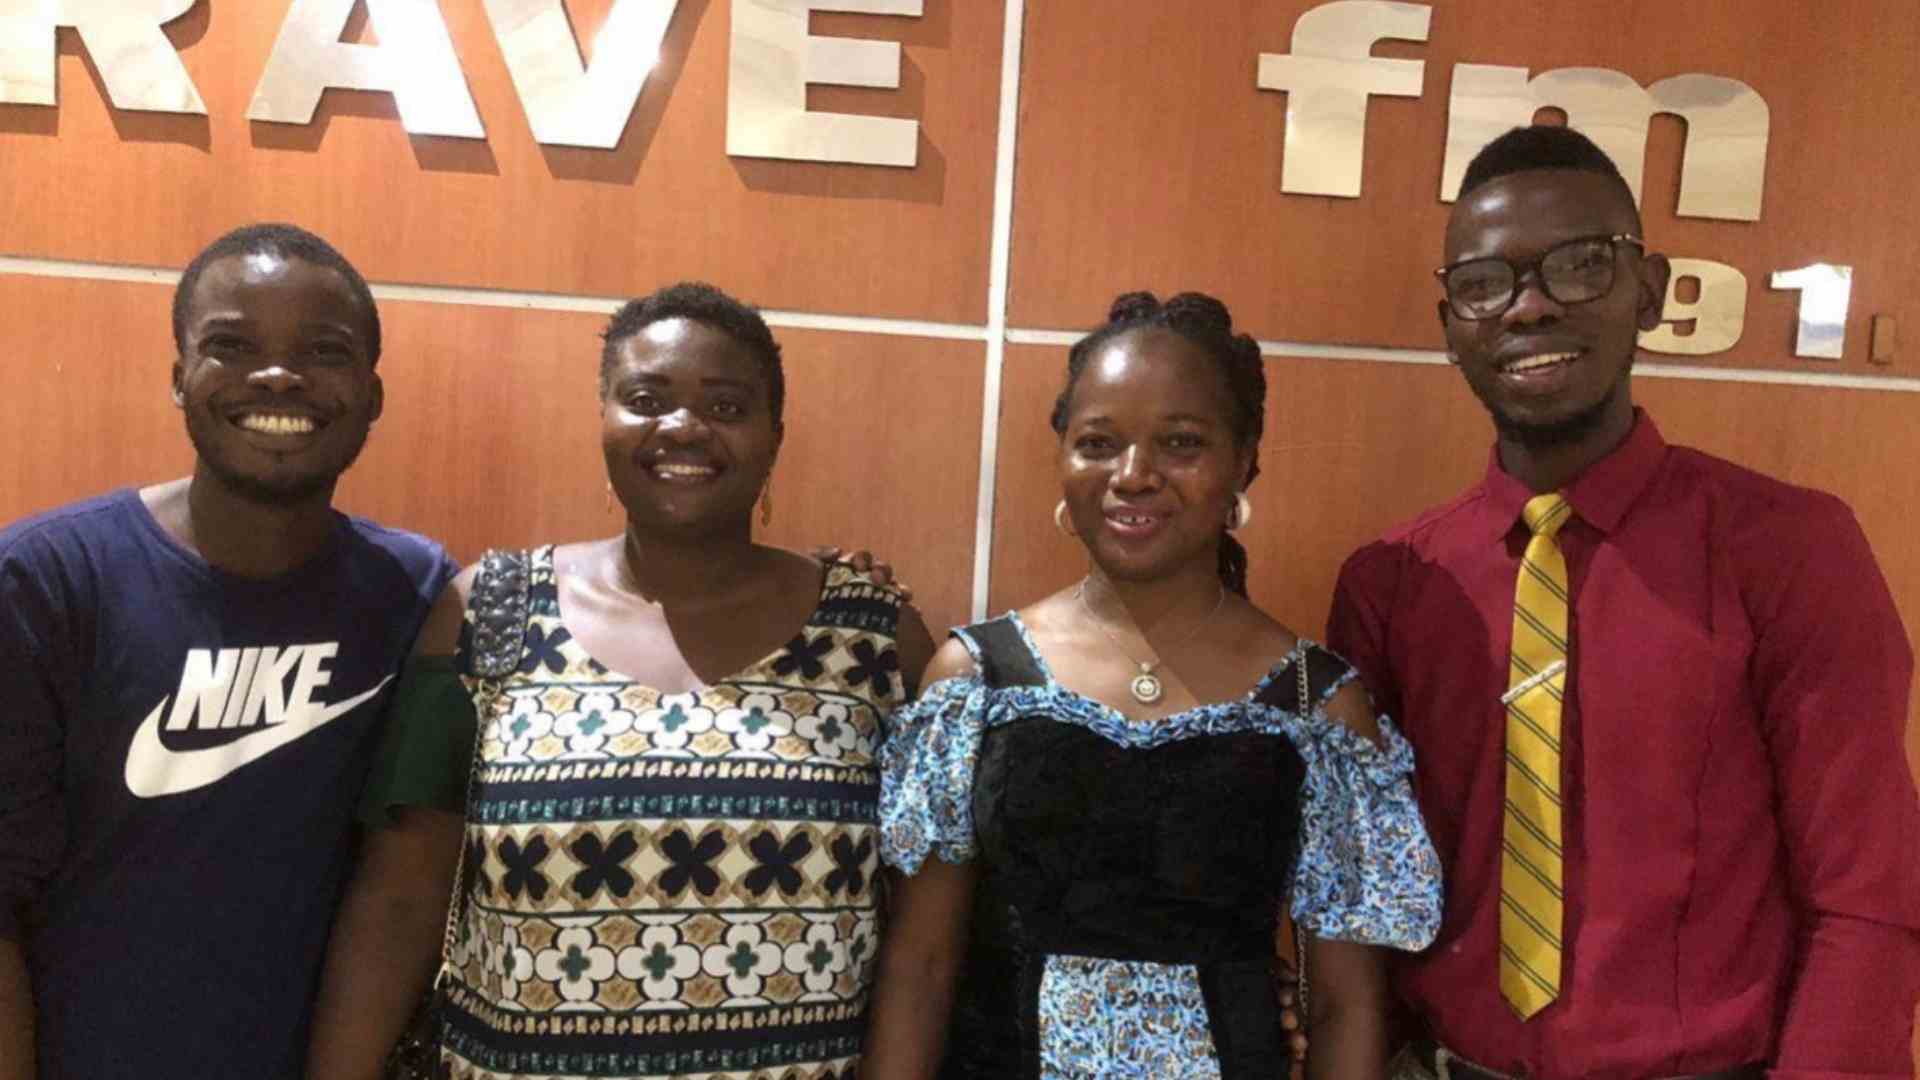 Read more about the article A Discussion about Equality to end FGM, Rave Radio, Osun State, Nigeria